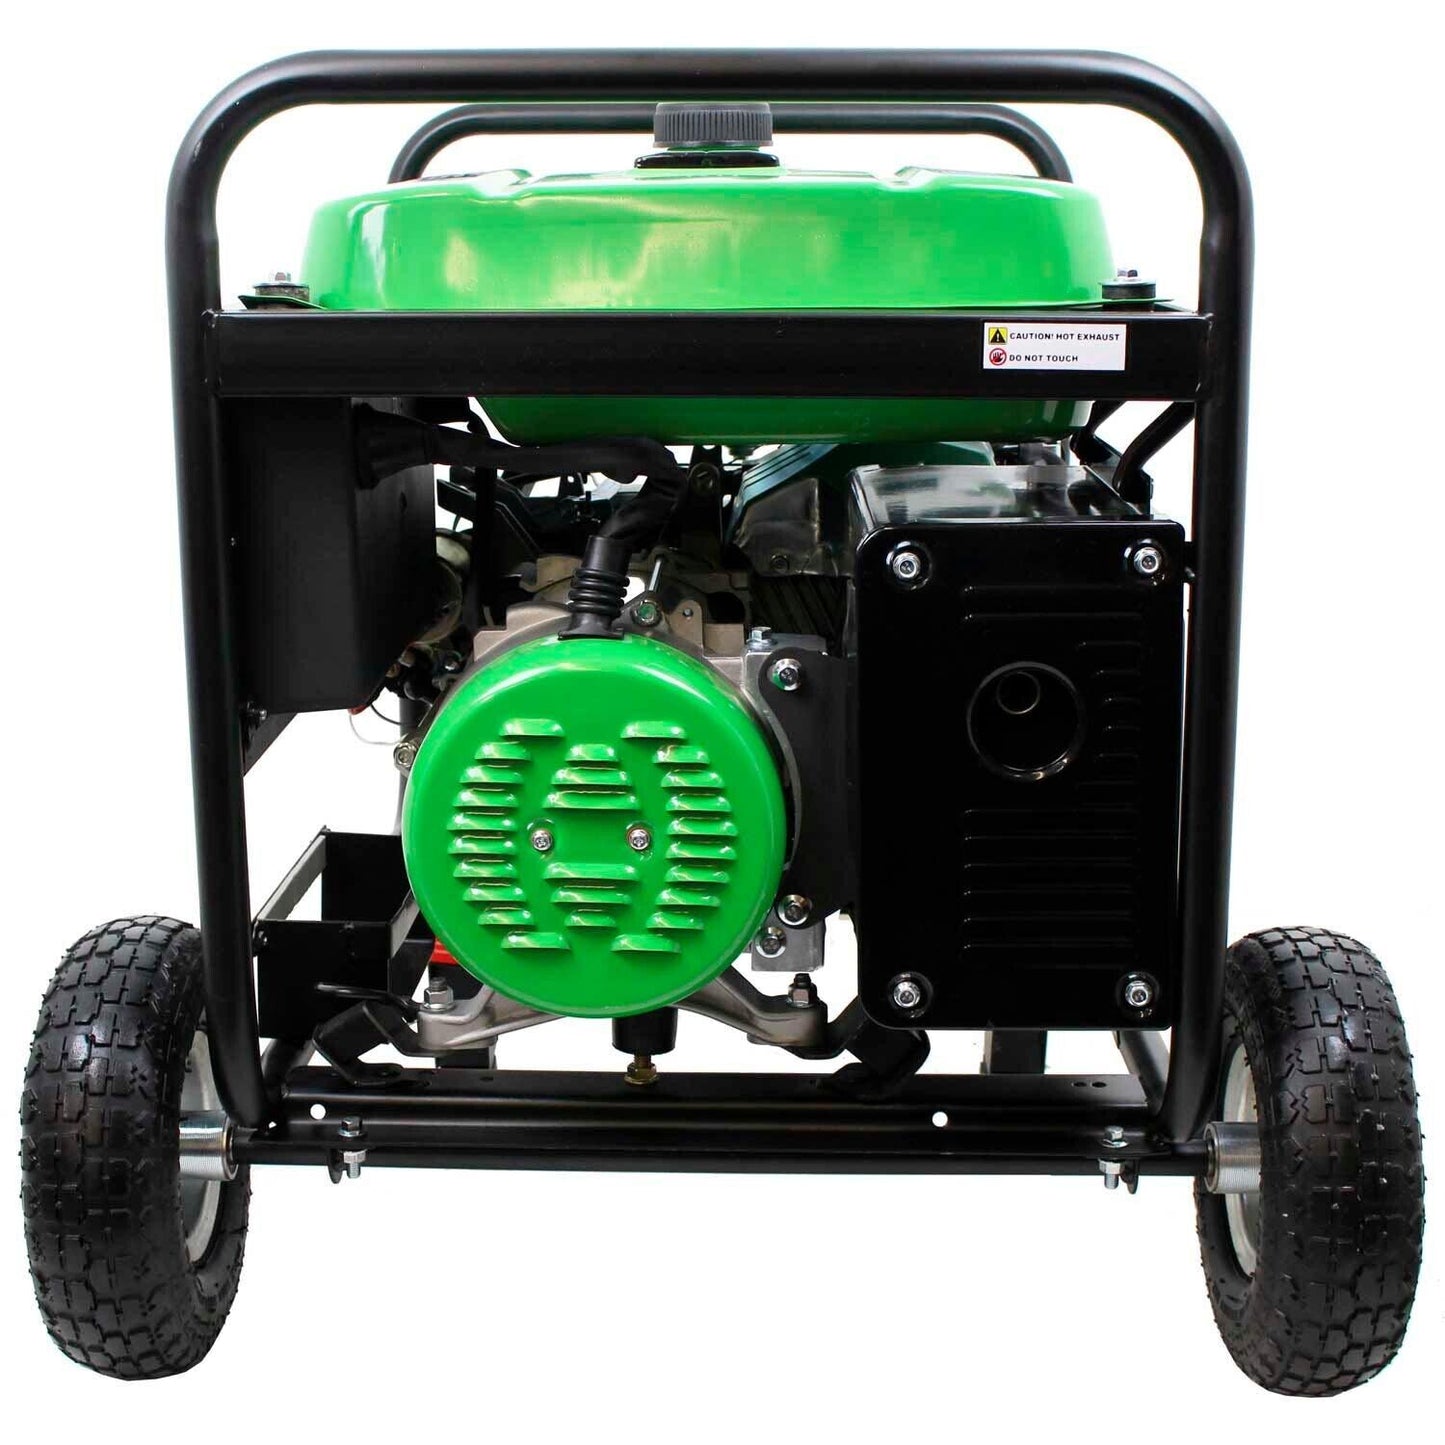 Portable Generator - 7.5 kW - Gas - Electric/Recoil - 120/240 Volts - 6.5 tank